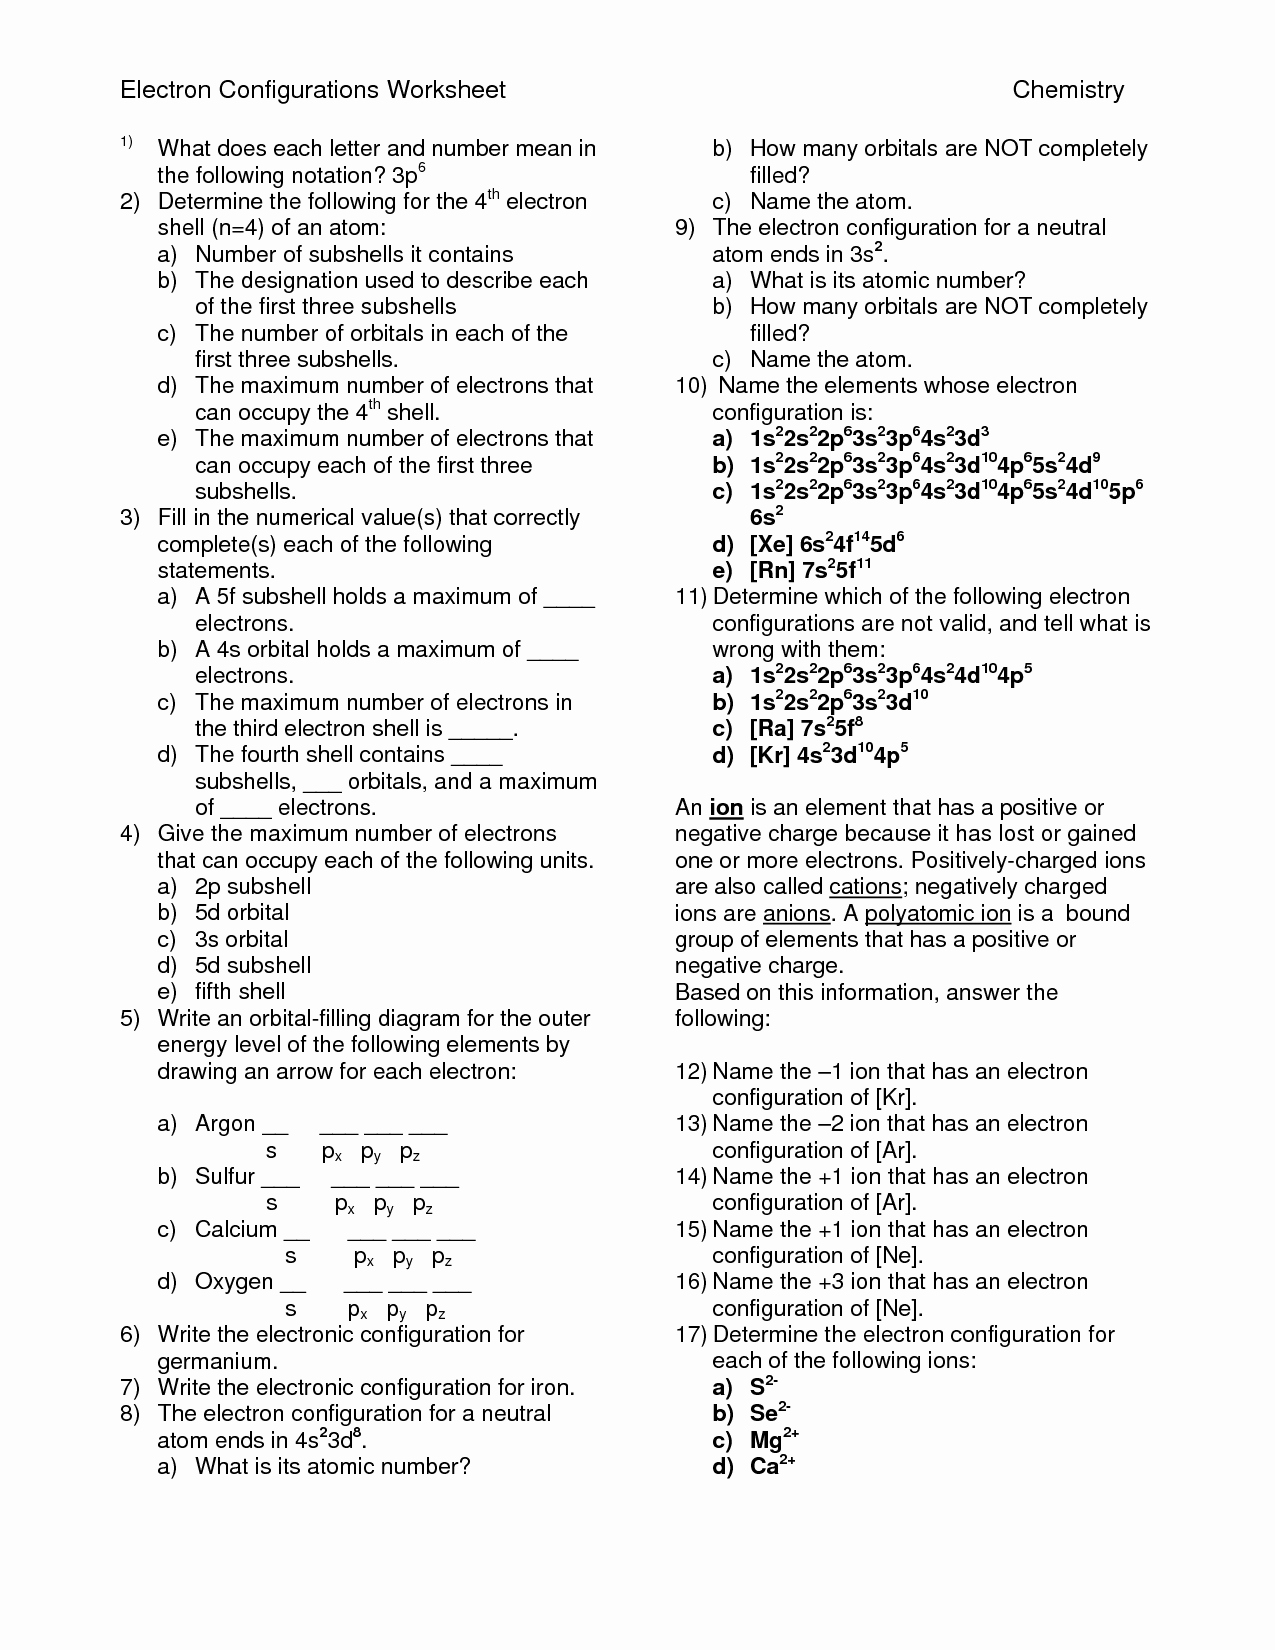 Electron Configuration Worksheet Answers Unique 13 Best Of High School Chemistry Worksheet Answers